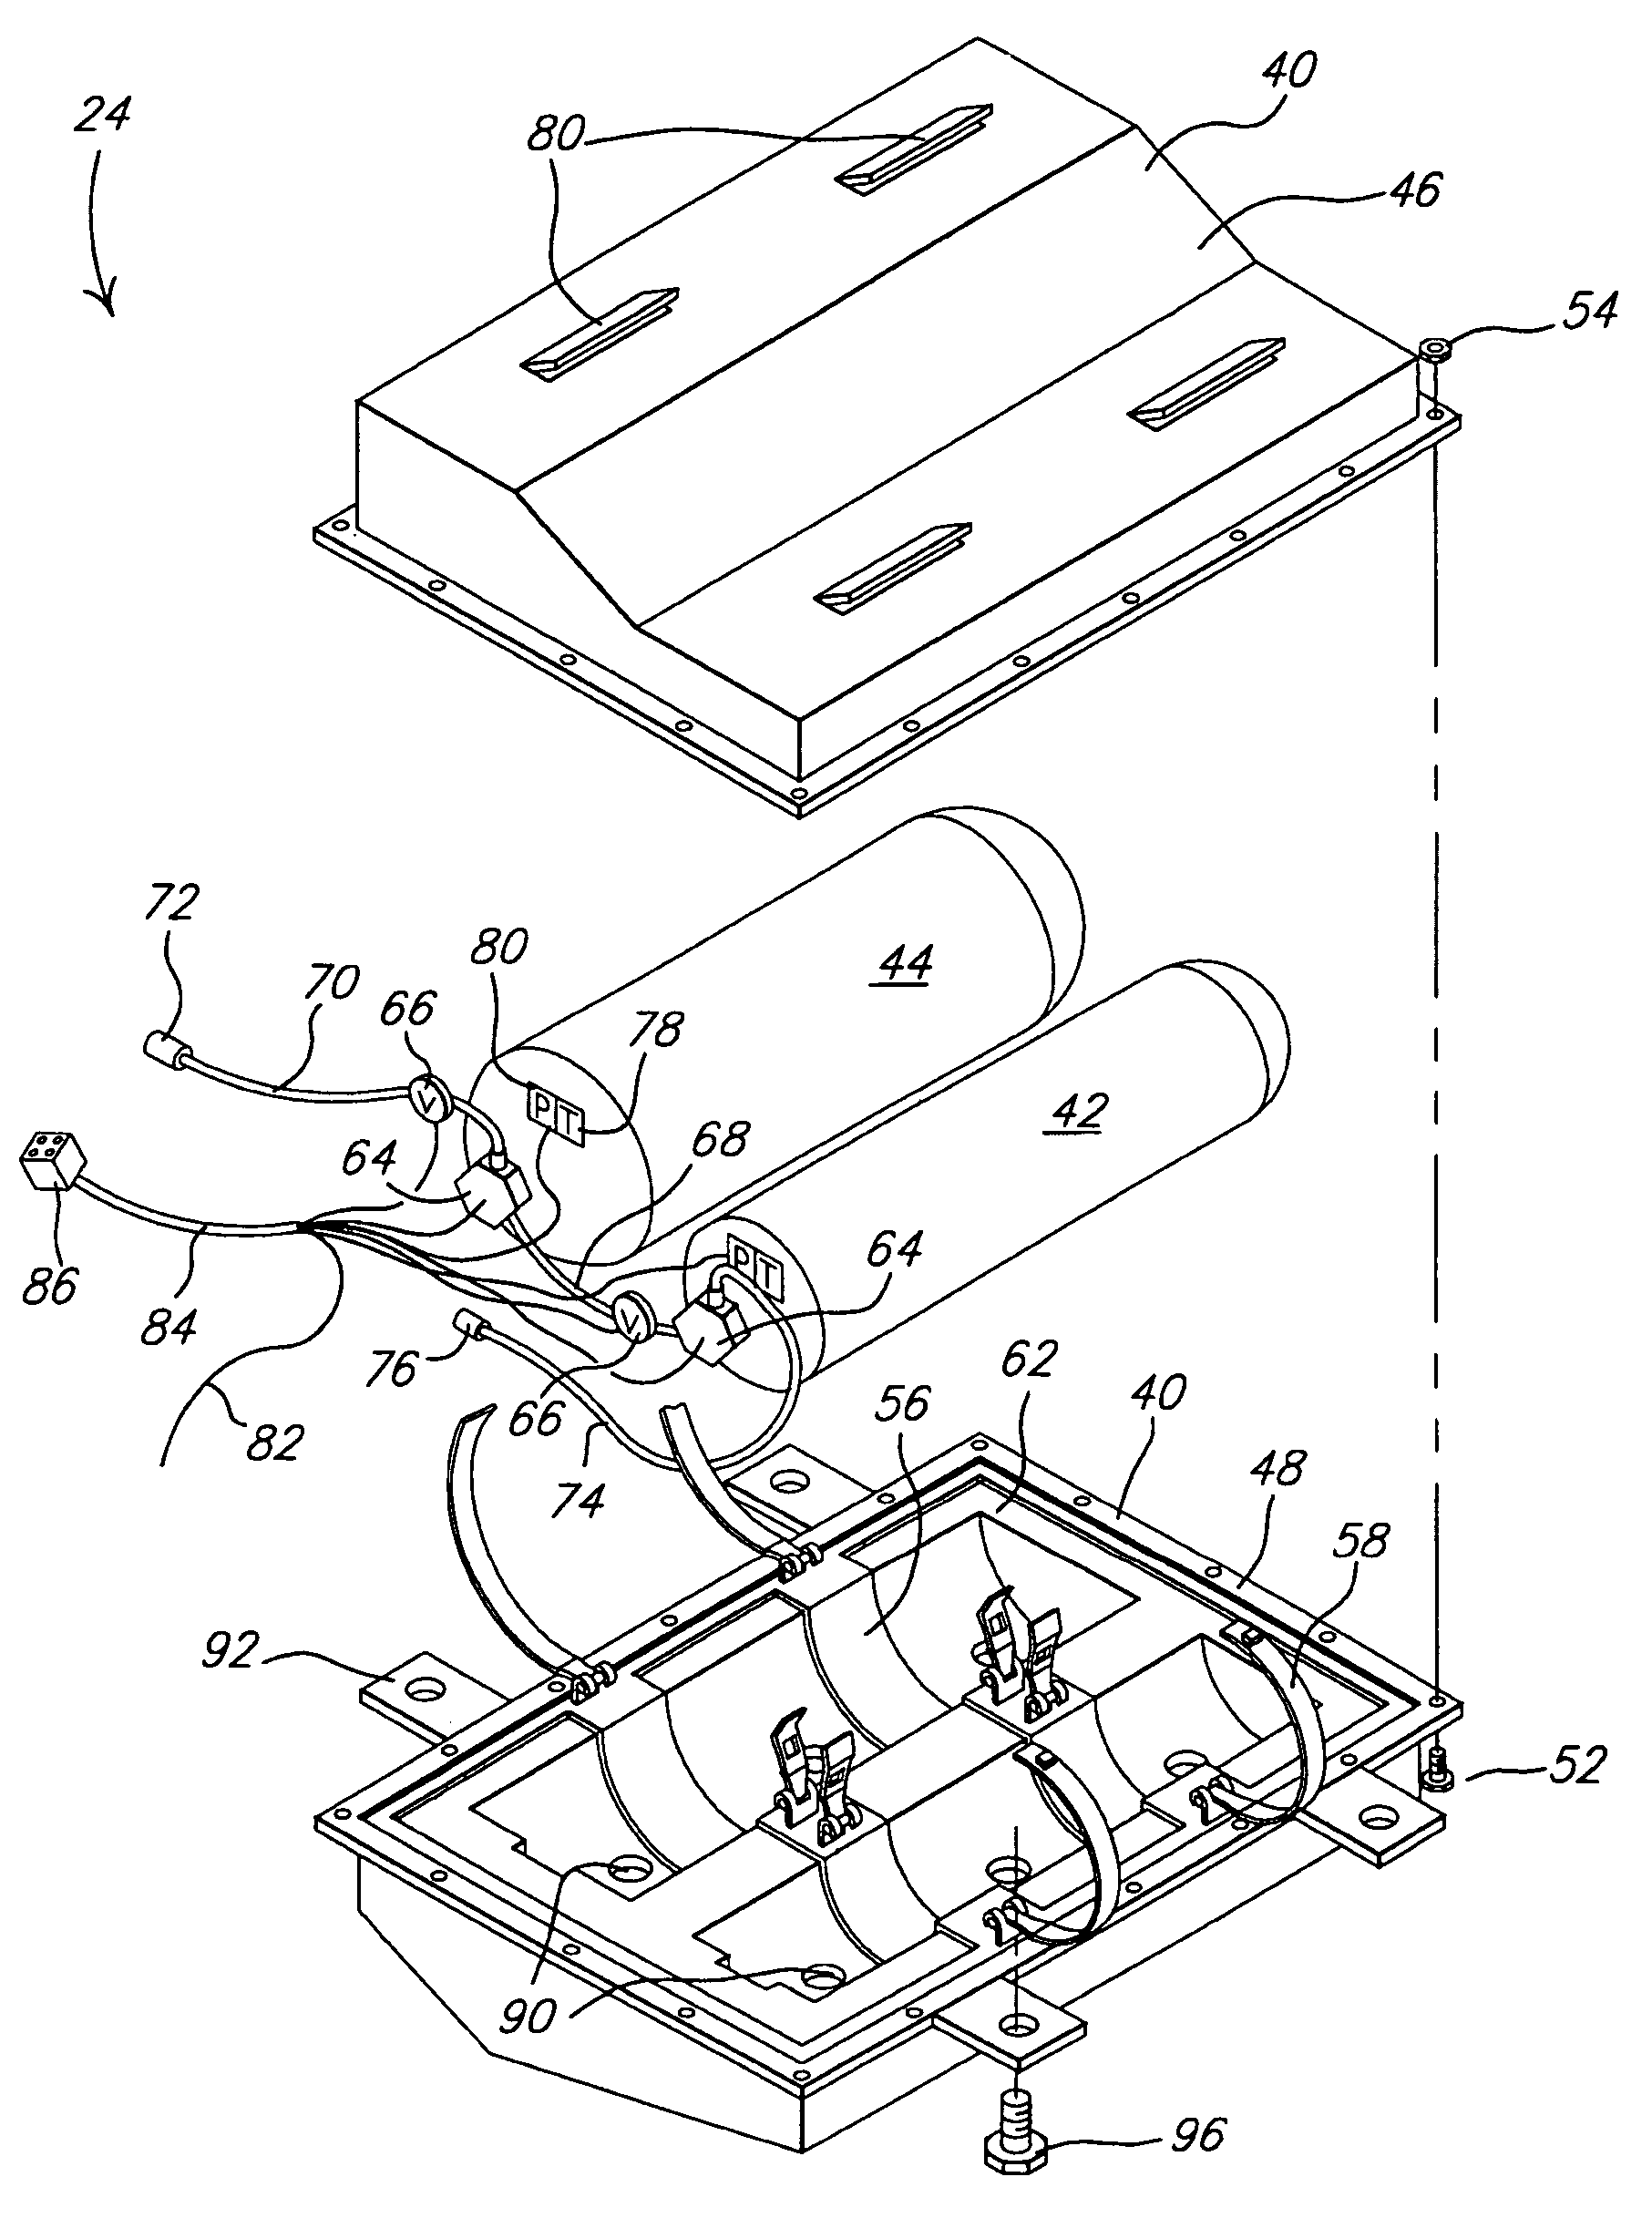 Container for gas storage tanks in a vehicle